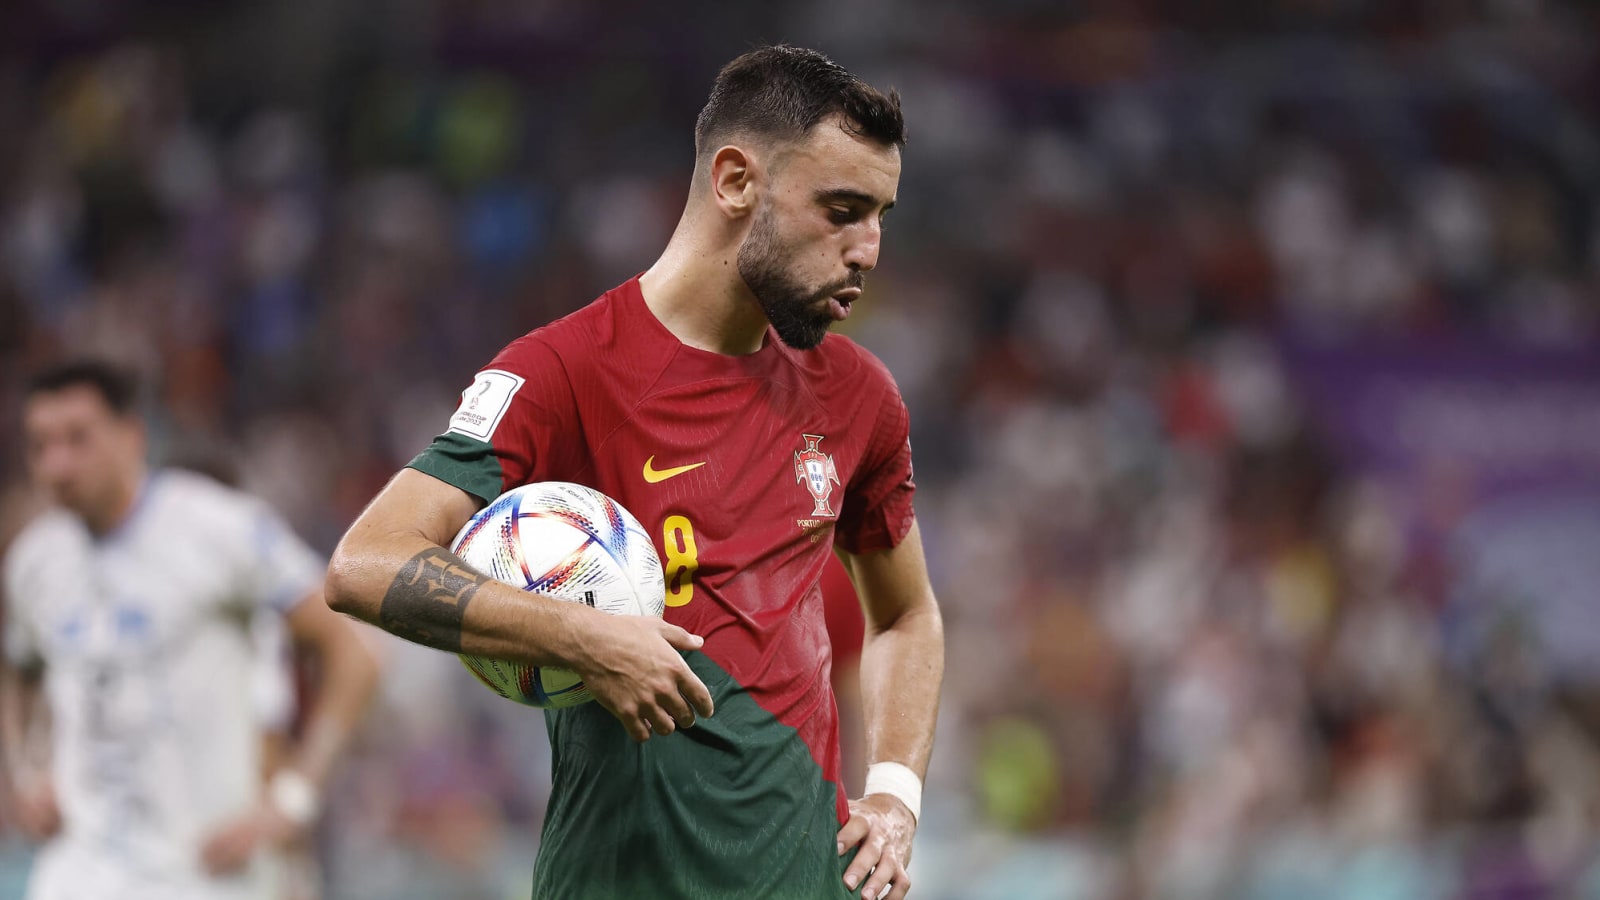 Manchester United players have doubts over Bruno Fernandes’ future